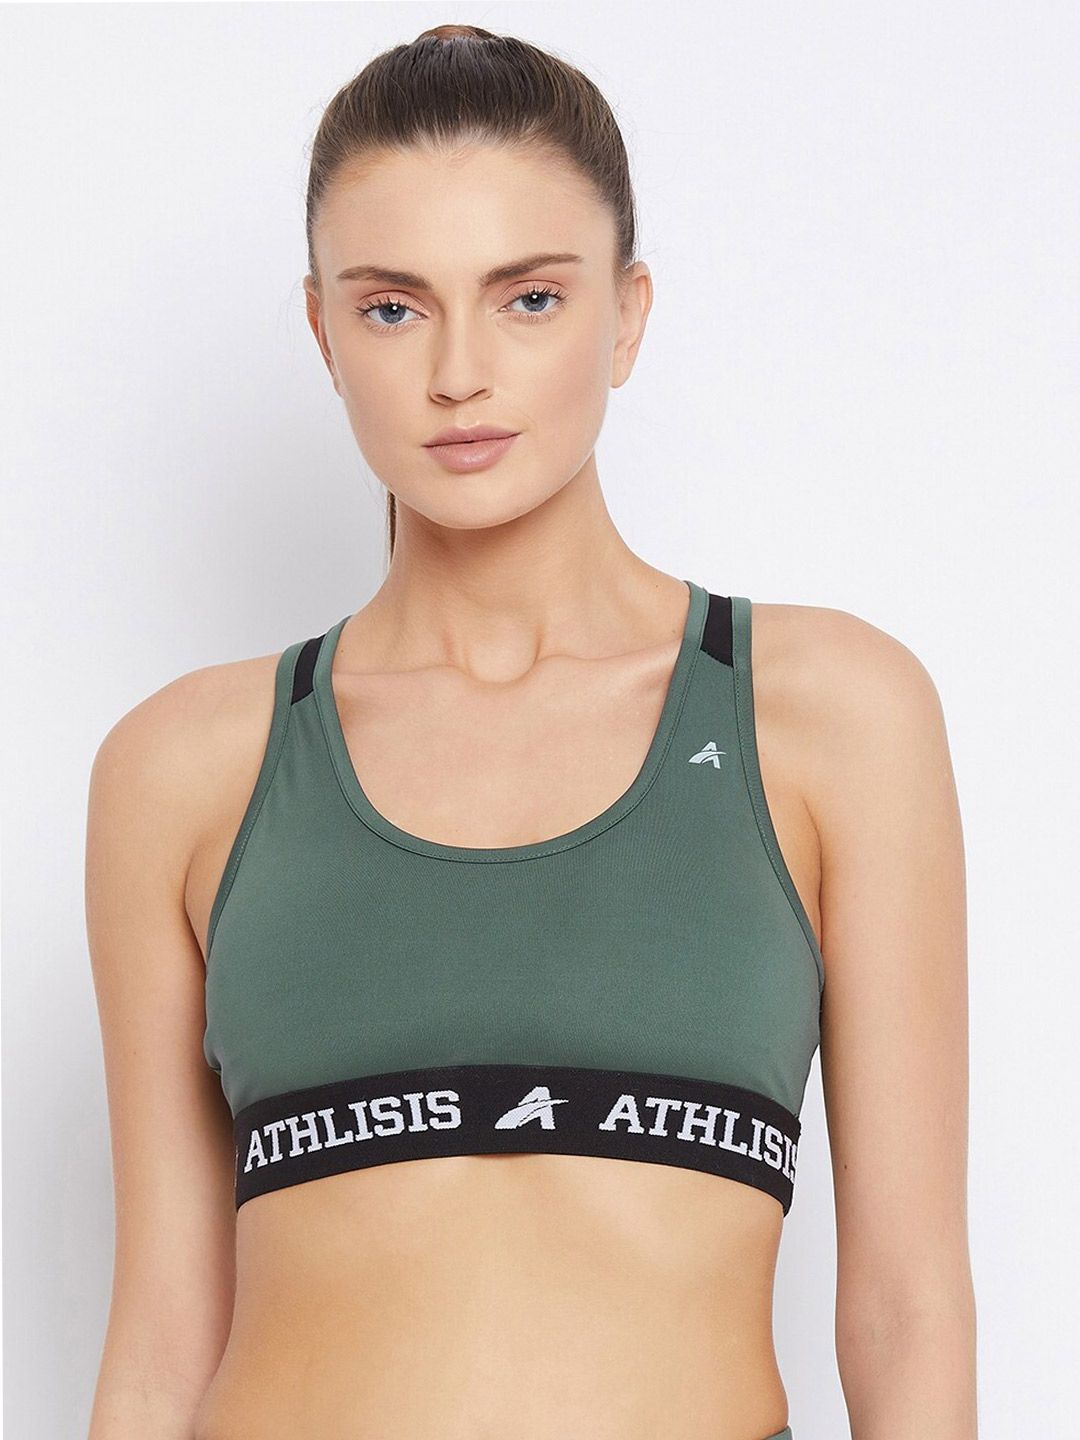 ATHLISIS Olive Green & White Non-Wired Lightly Padded Gym Or Training Workout Bra Price in India